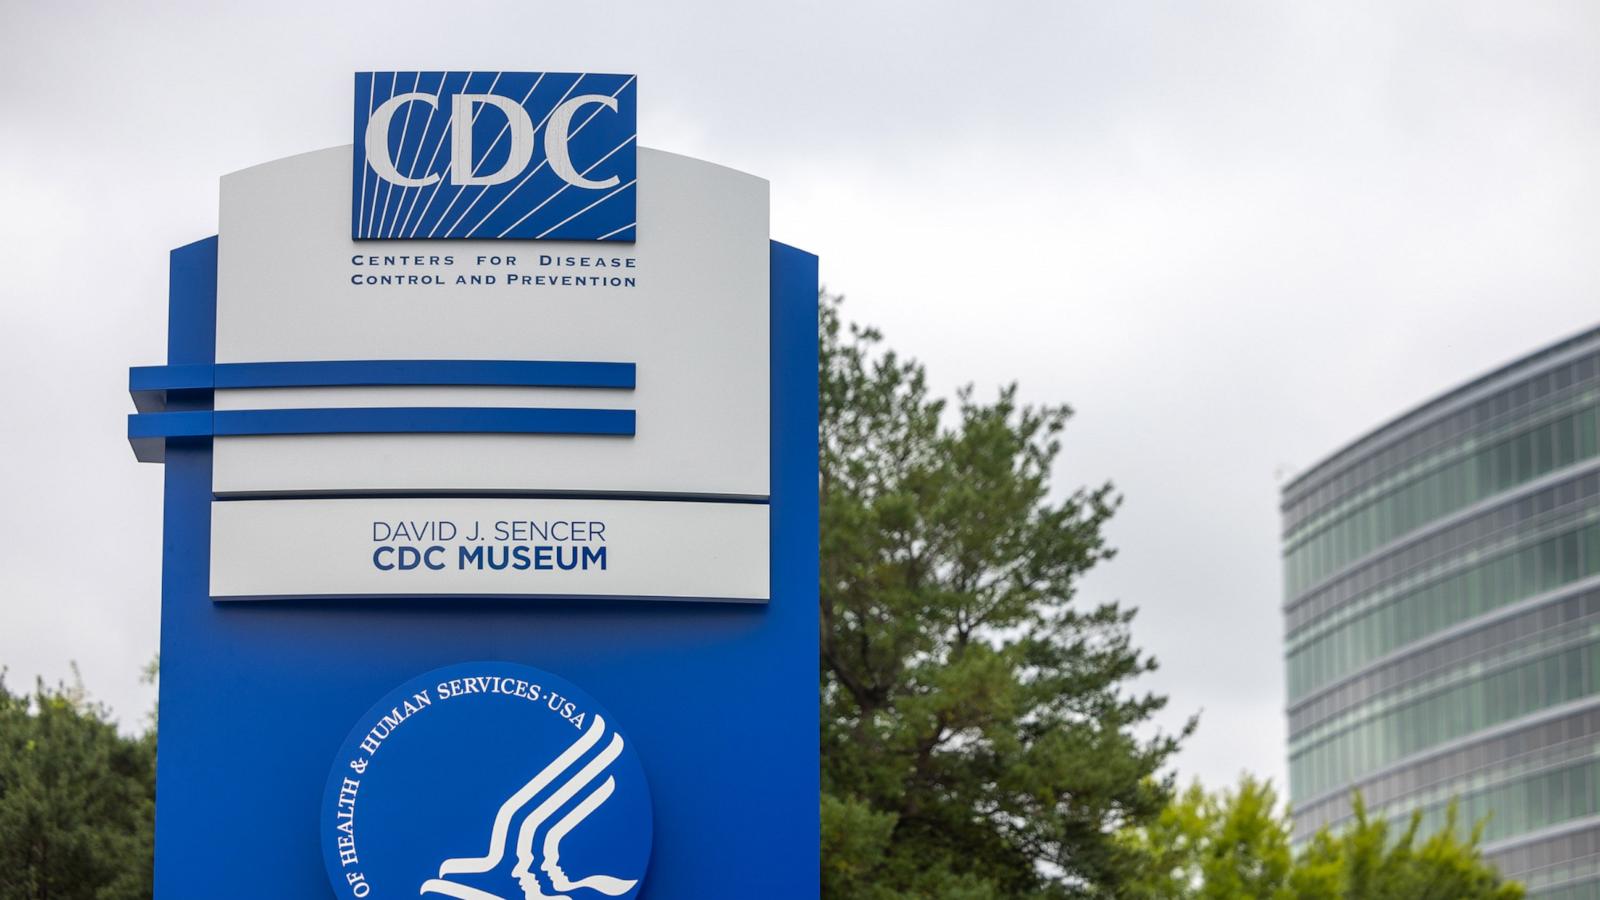 covid-19 hospitalizations hit record low, the cdc says